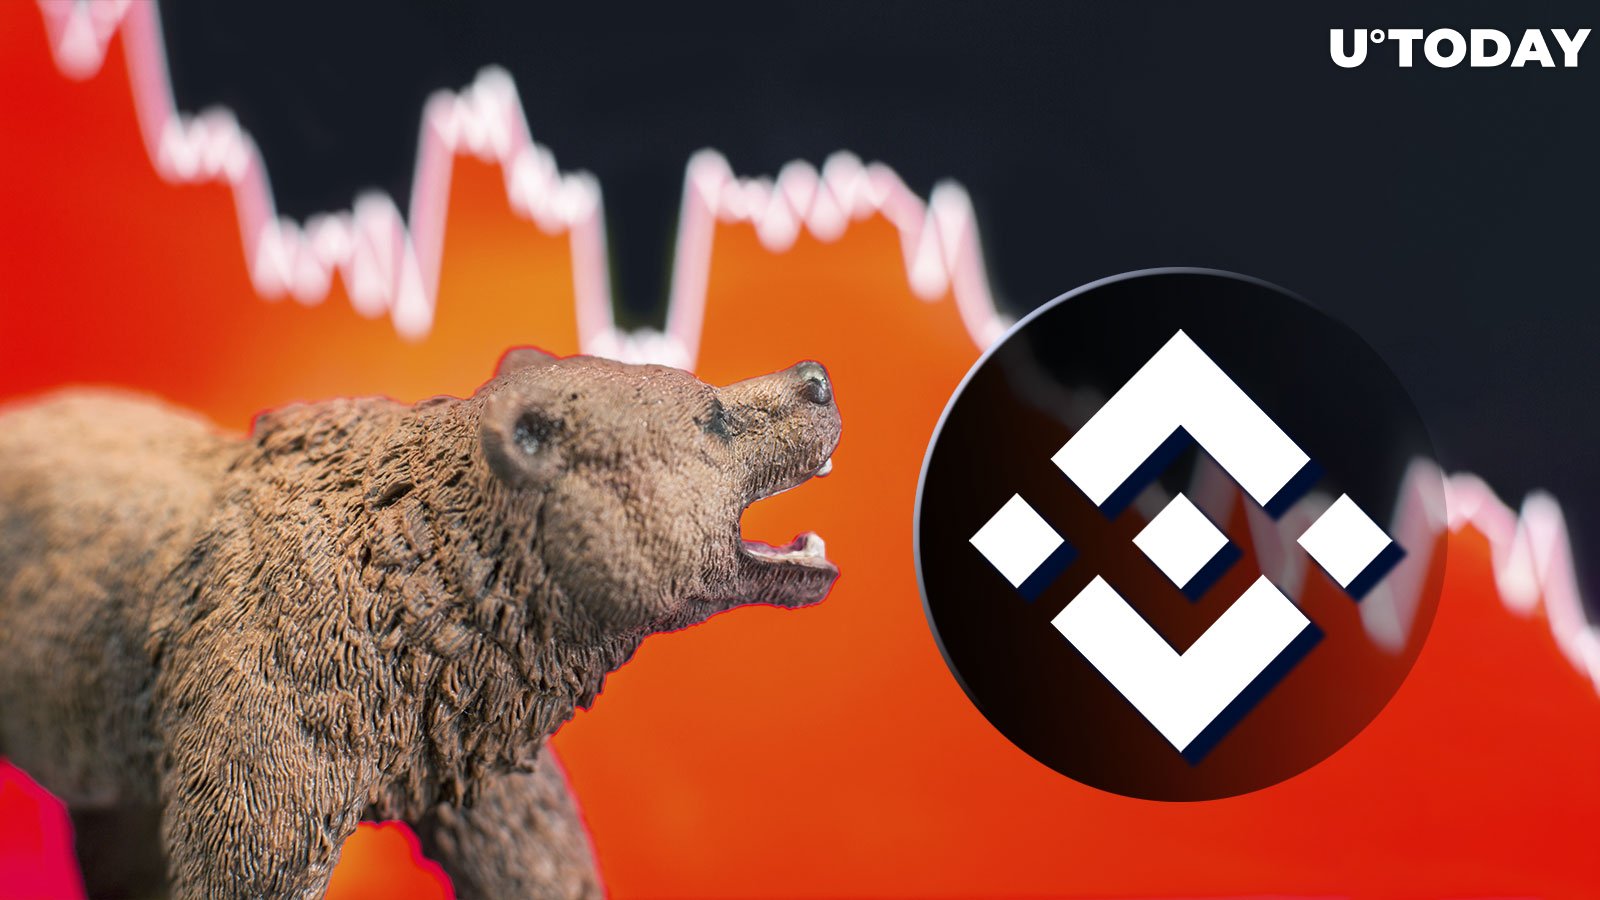 Binance Delivers $1 Billion Blow to Crypto Bears